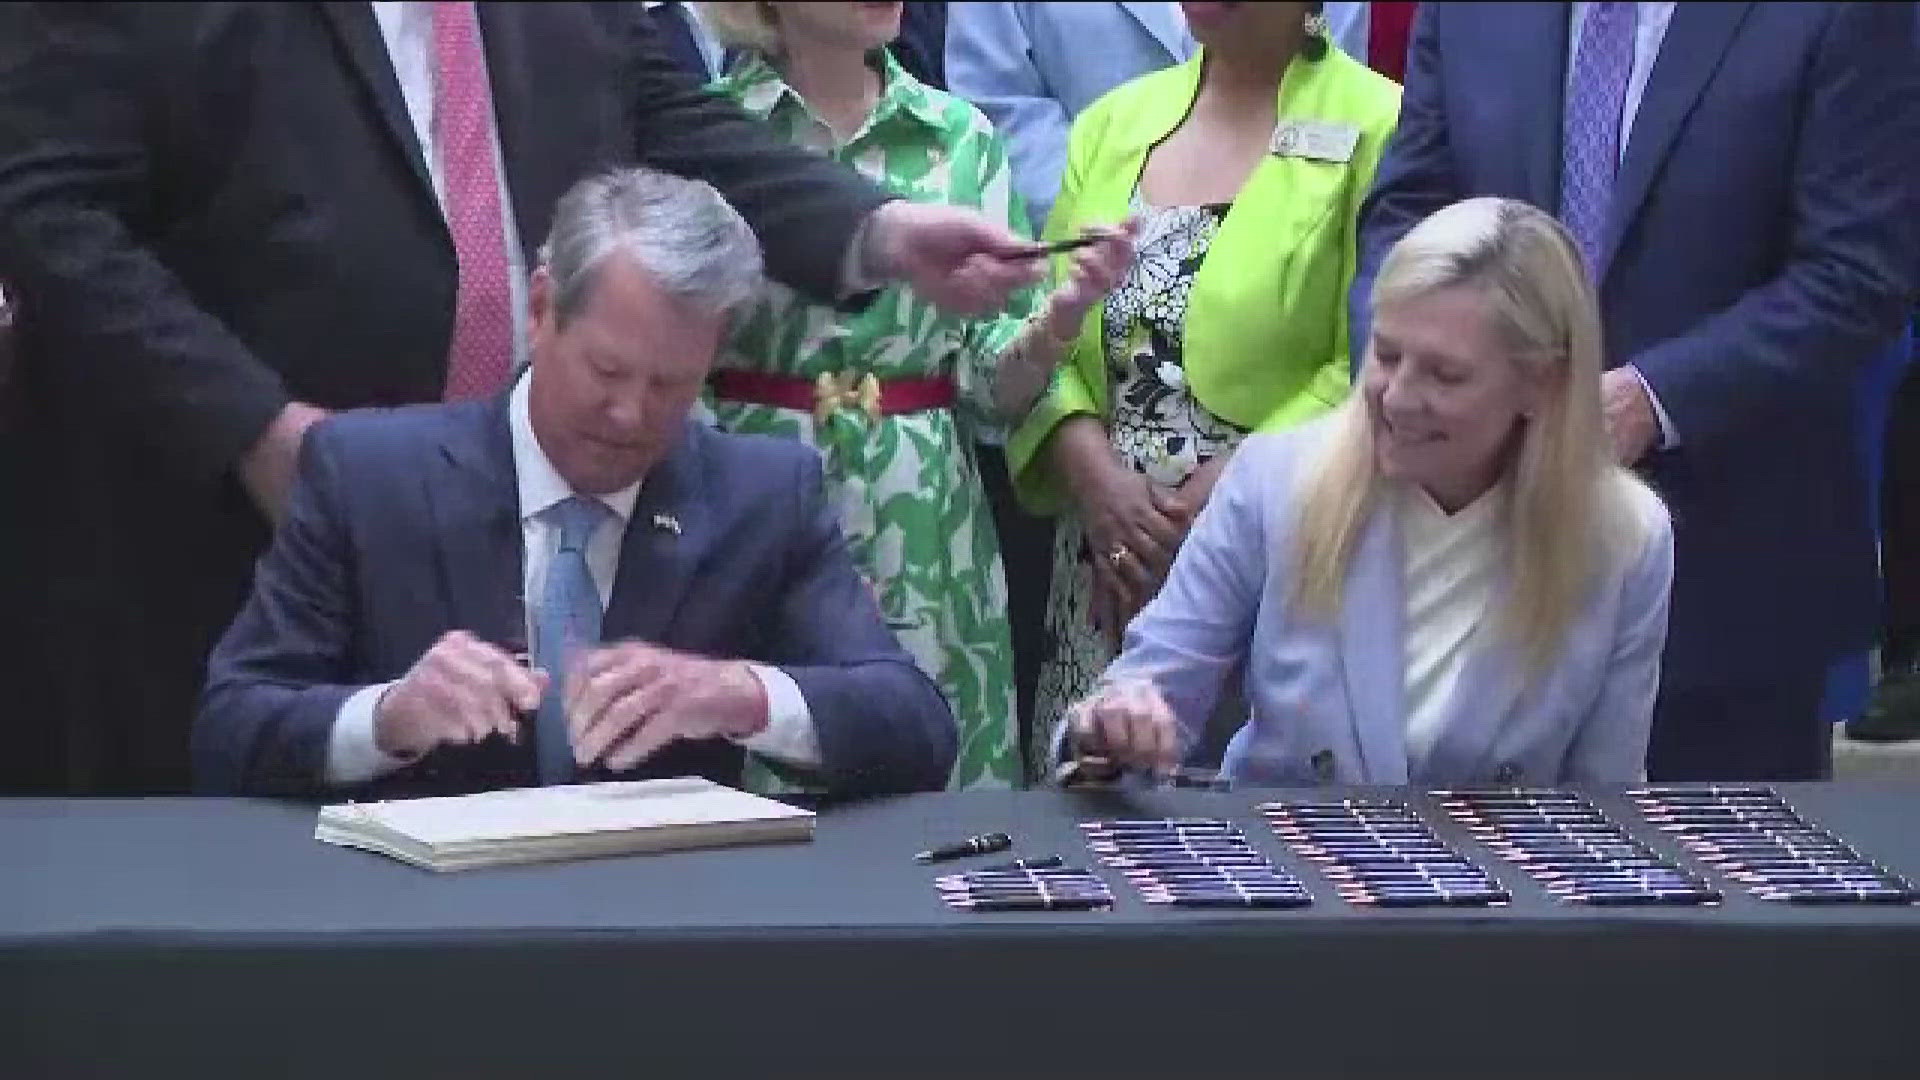 Gov. Kemp signed the state budget on Tuesday under the gold dome with pay raises for public school teachers.